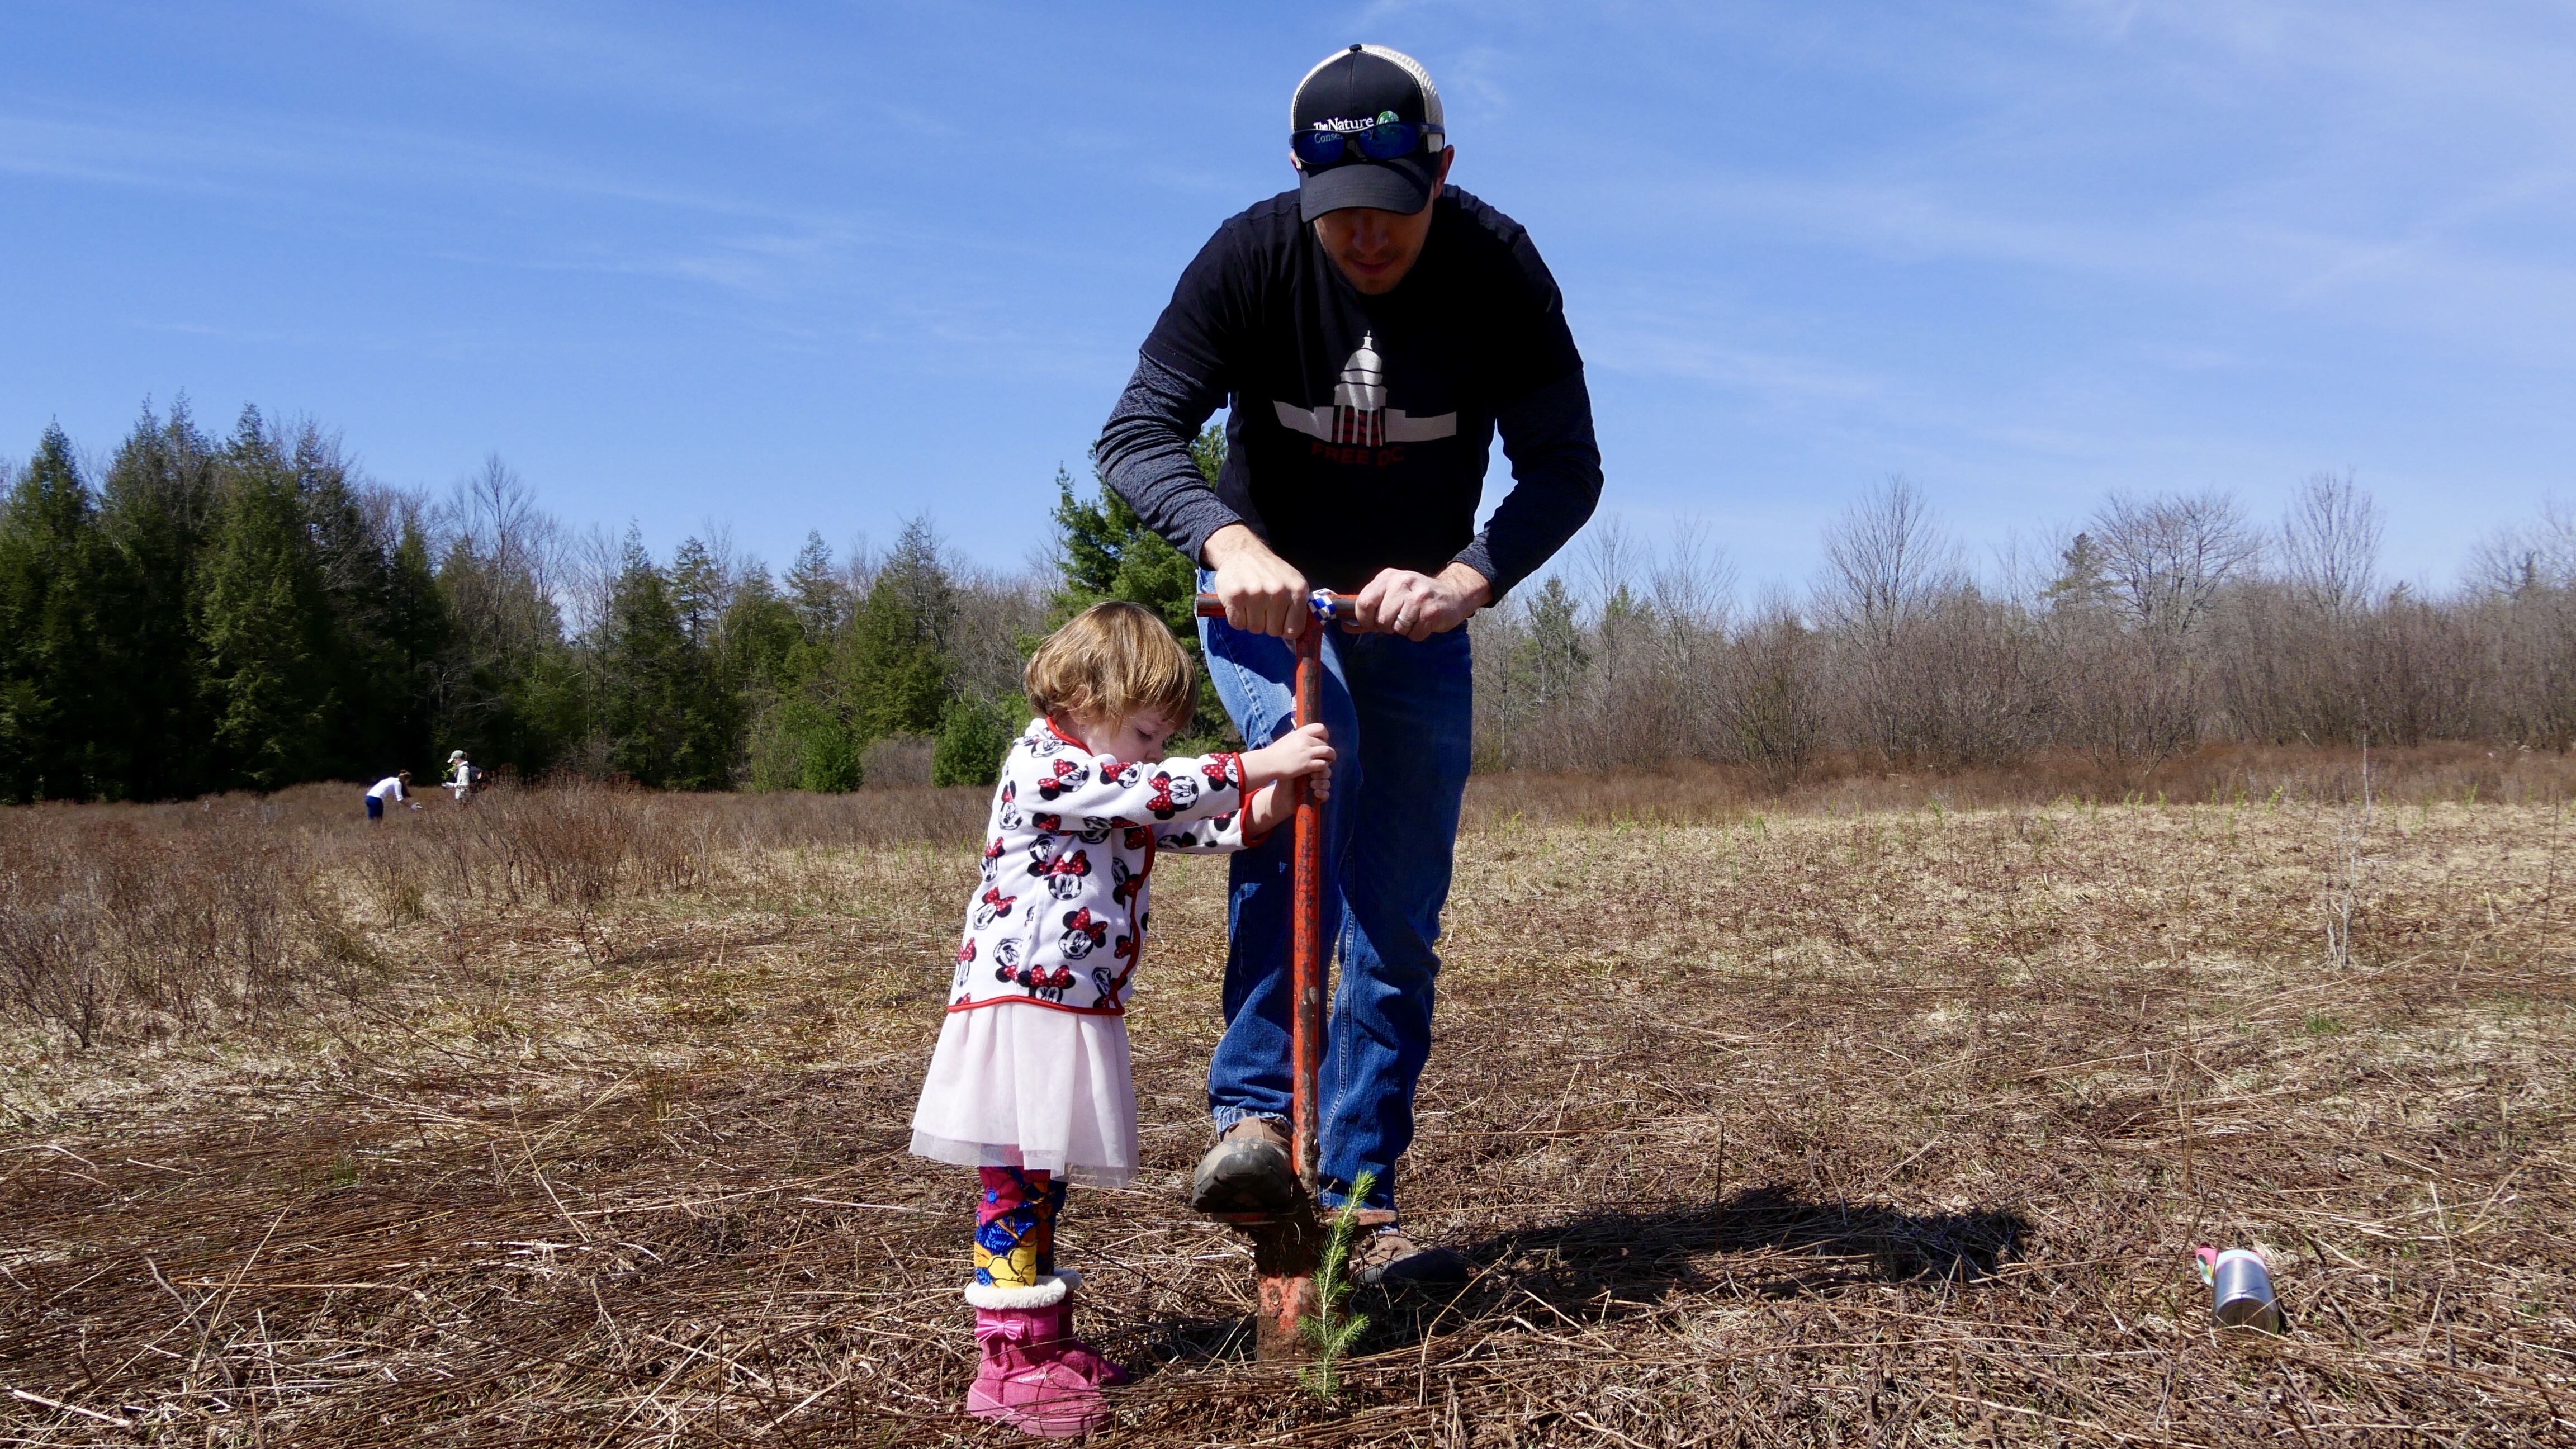 A man helps a young girl use a dibble tool to plant a tree seedling.